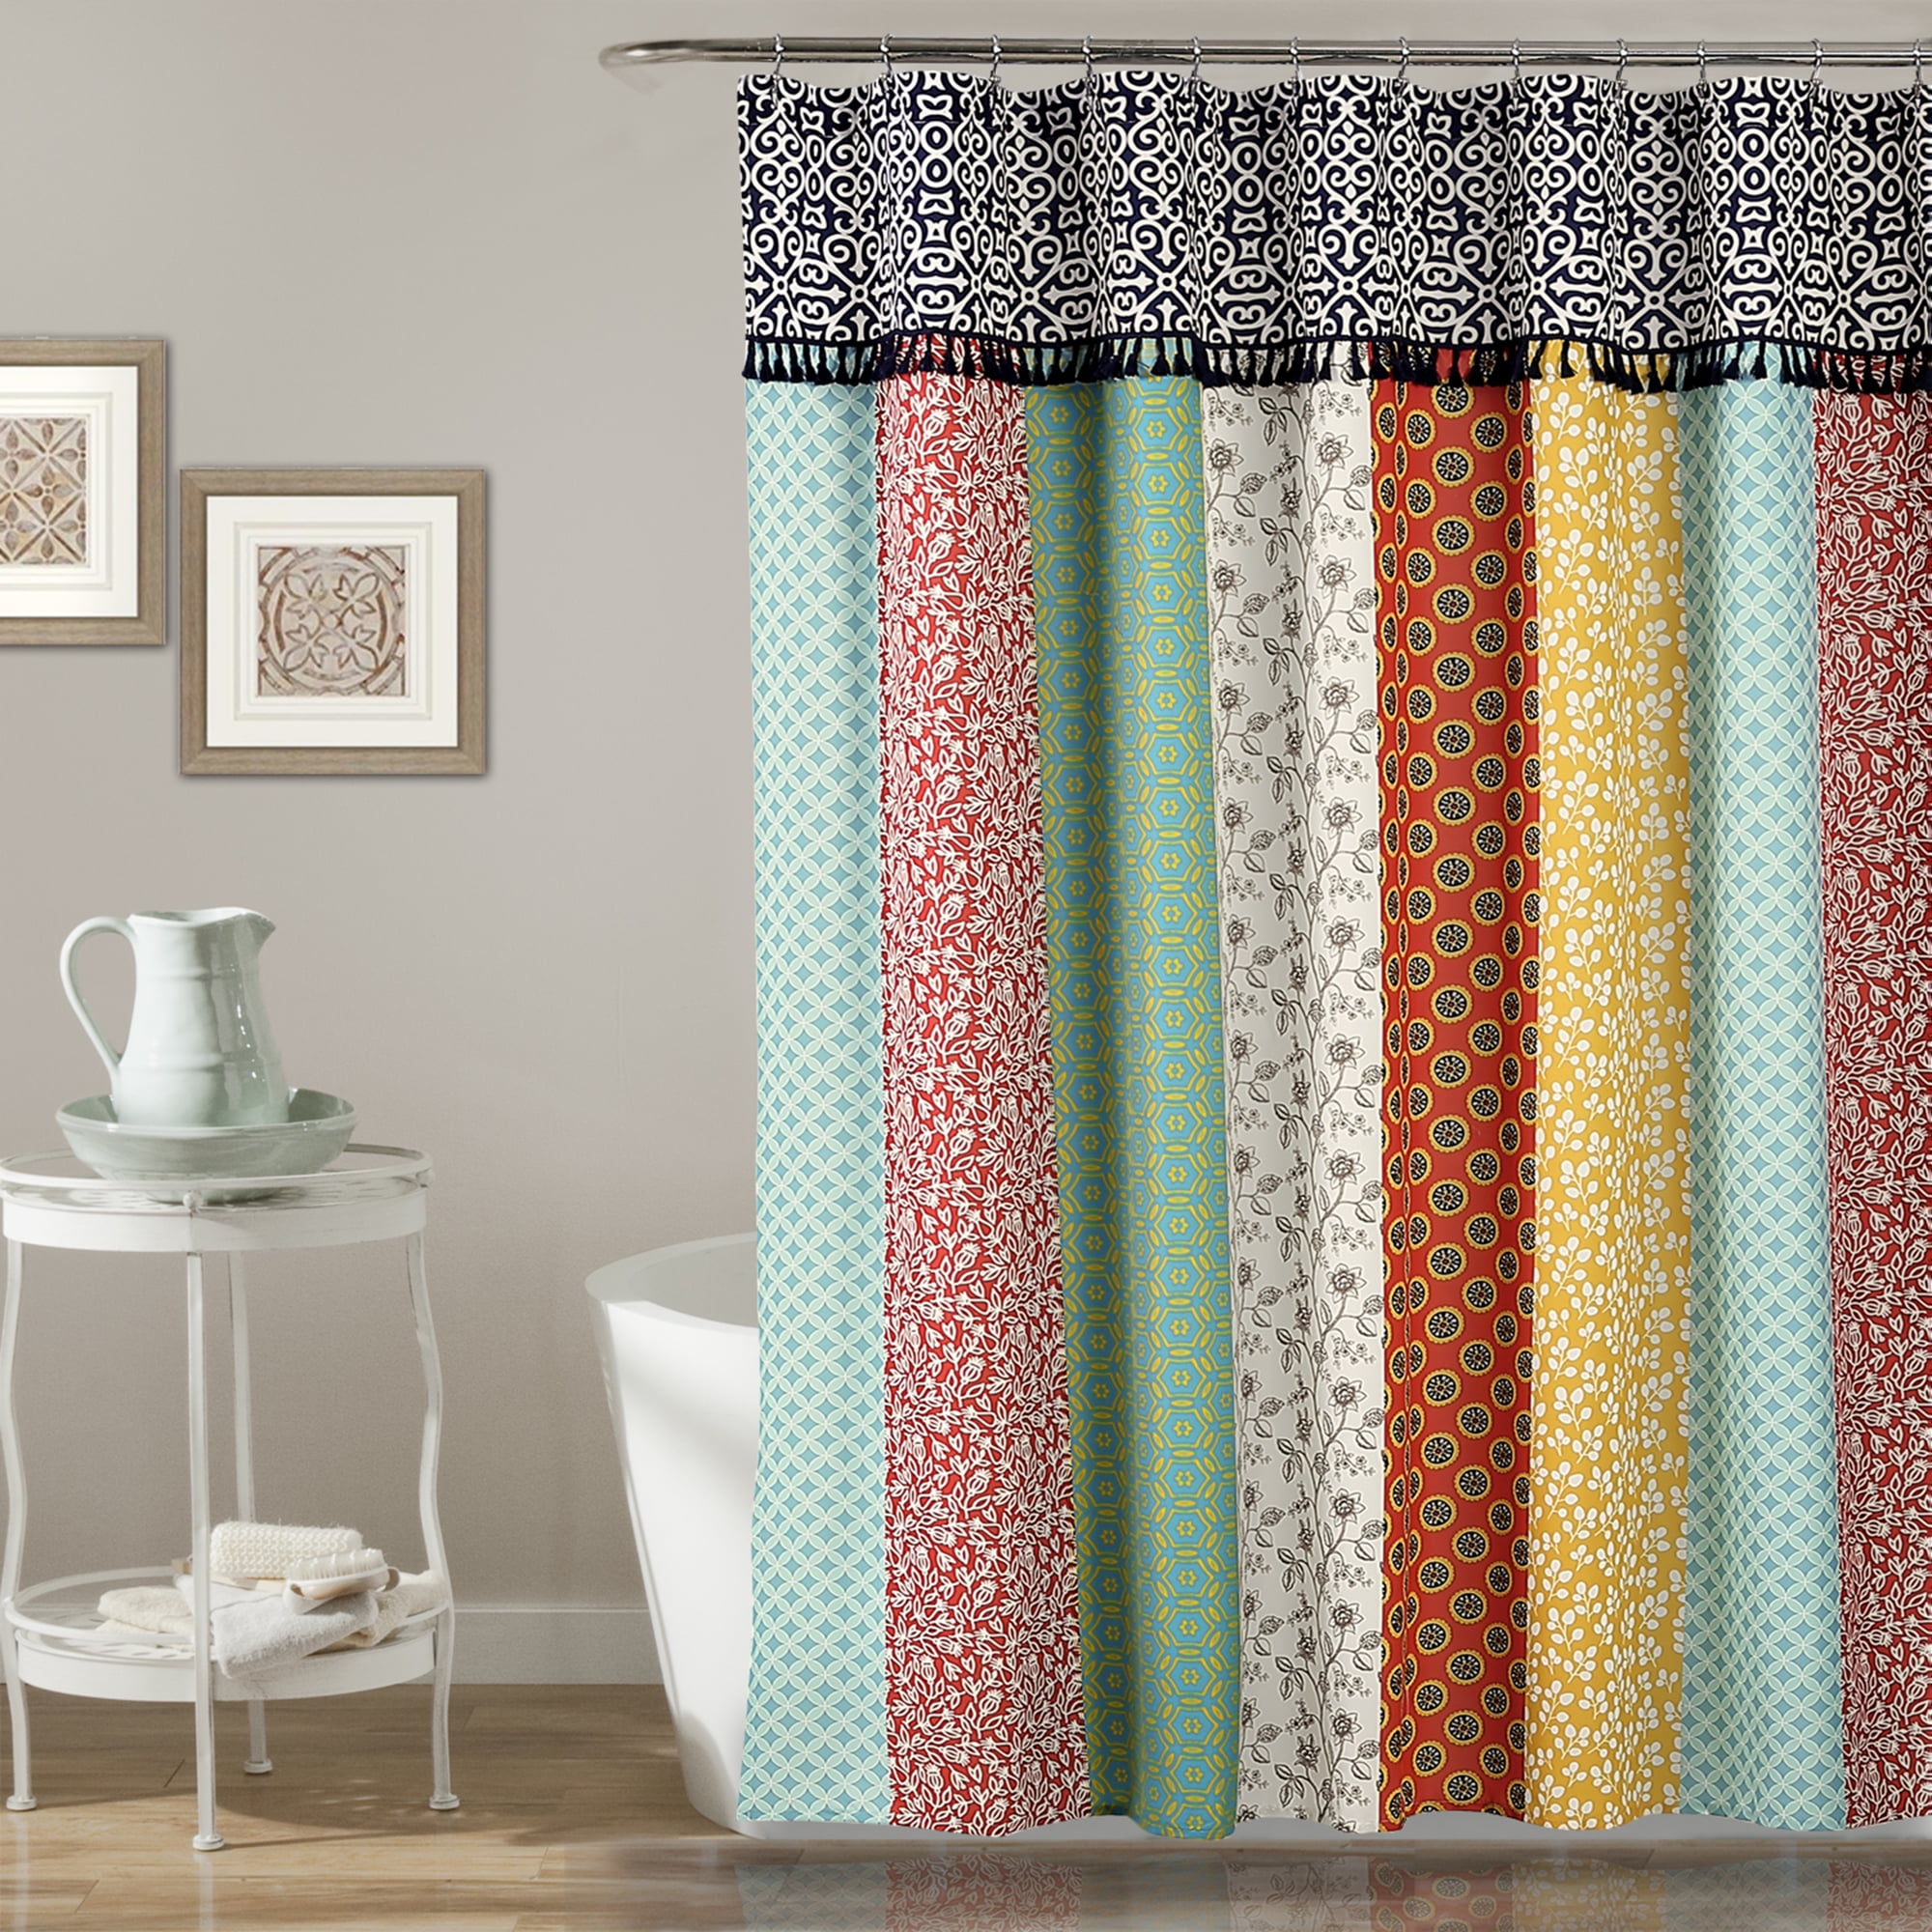 New Traditions by Waverly "Wind" Fabric Shower Curtain Floral and Stripe 70x72 